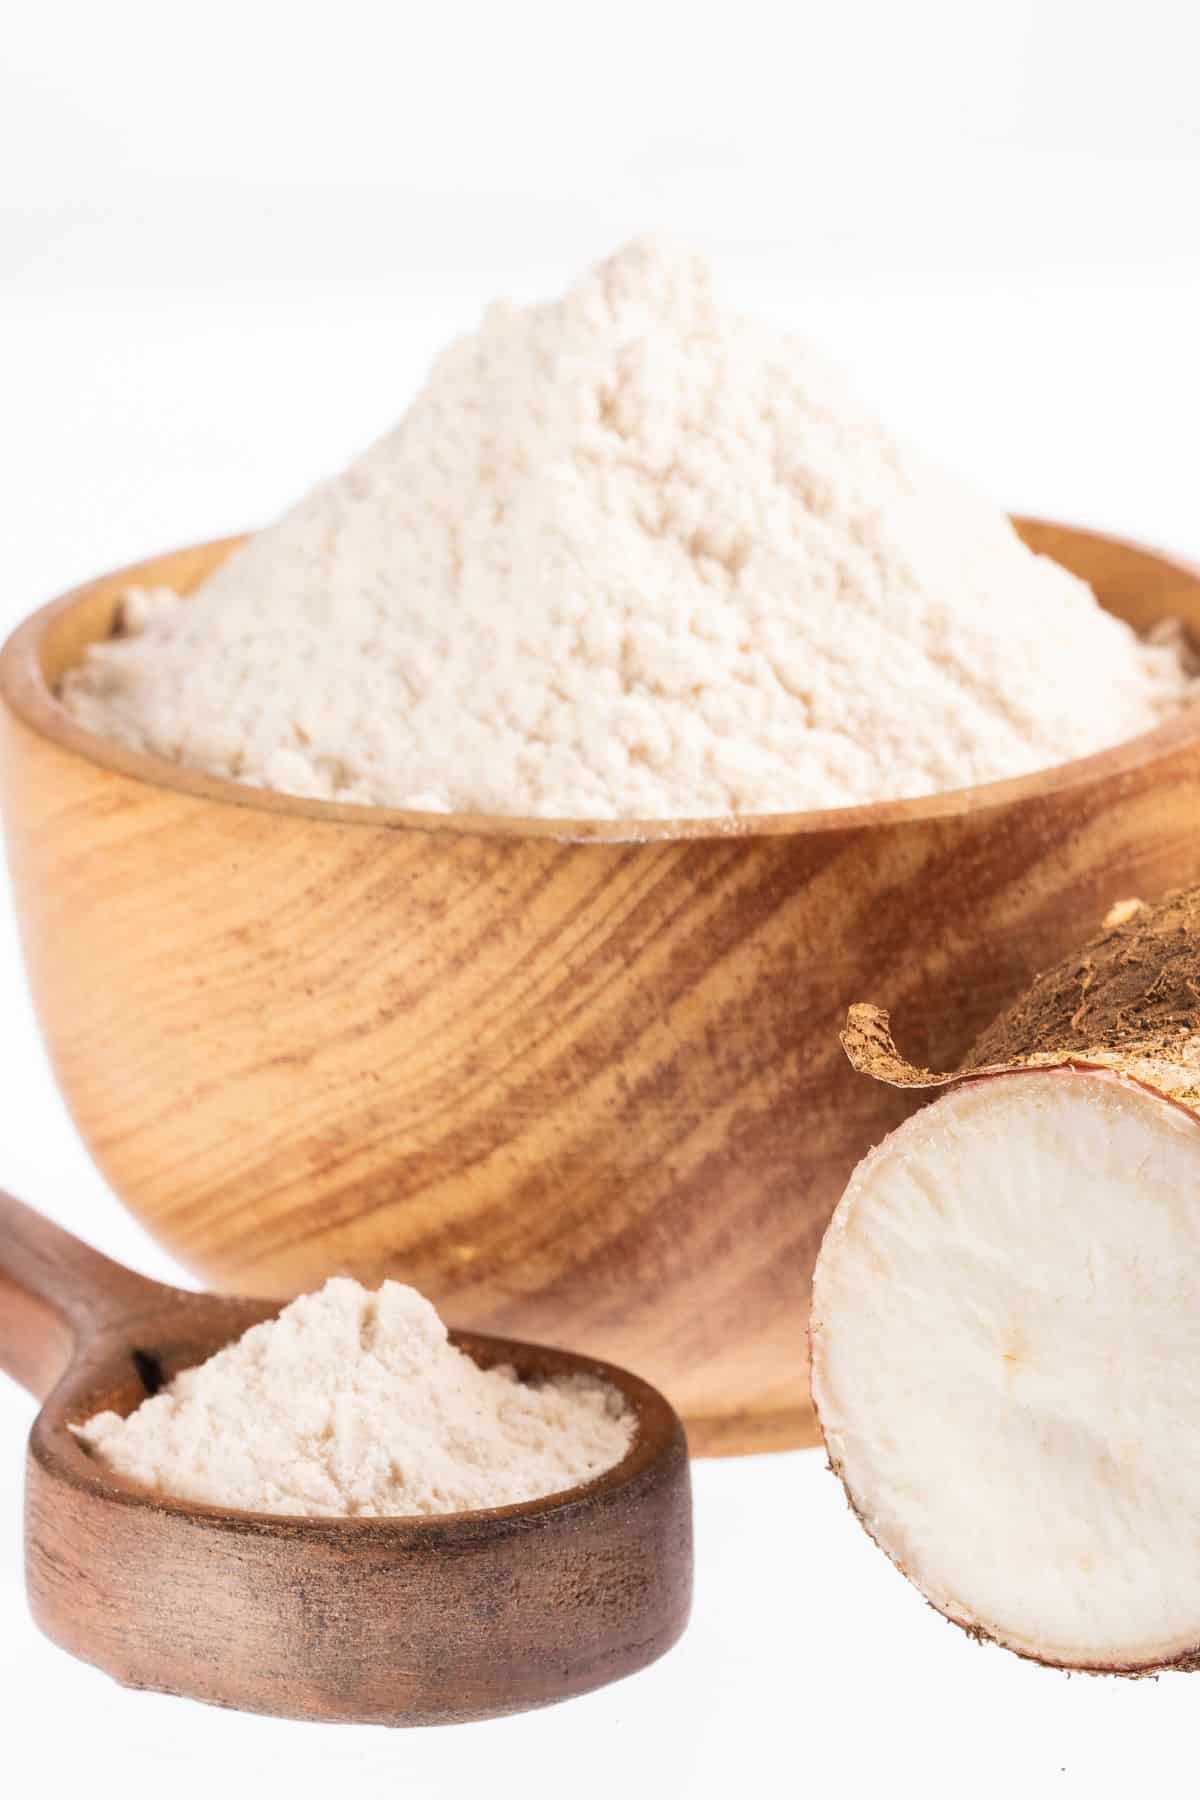 Bowl and spoonful of arrowroot flour on white background.